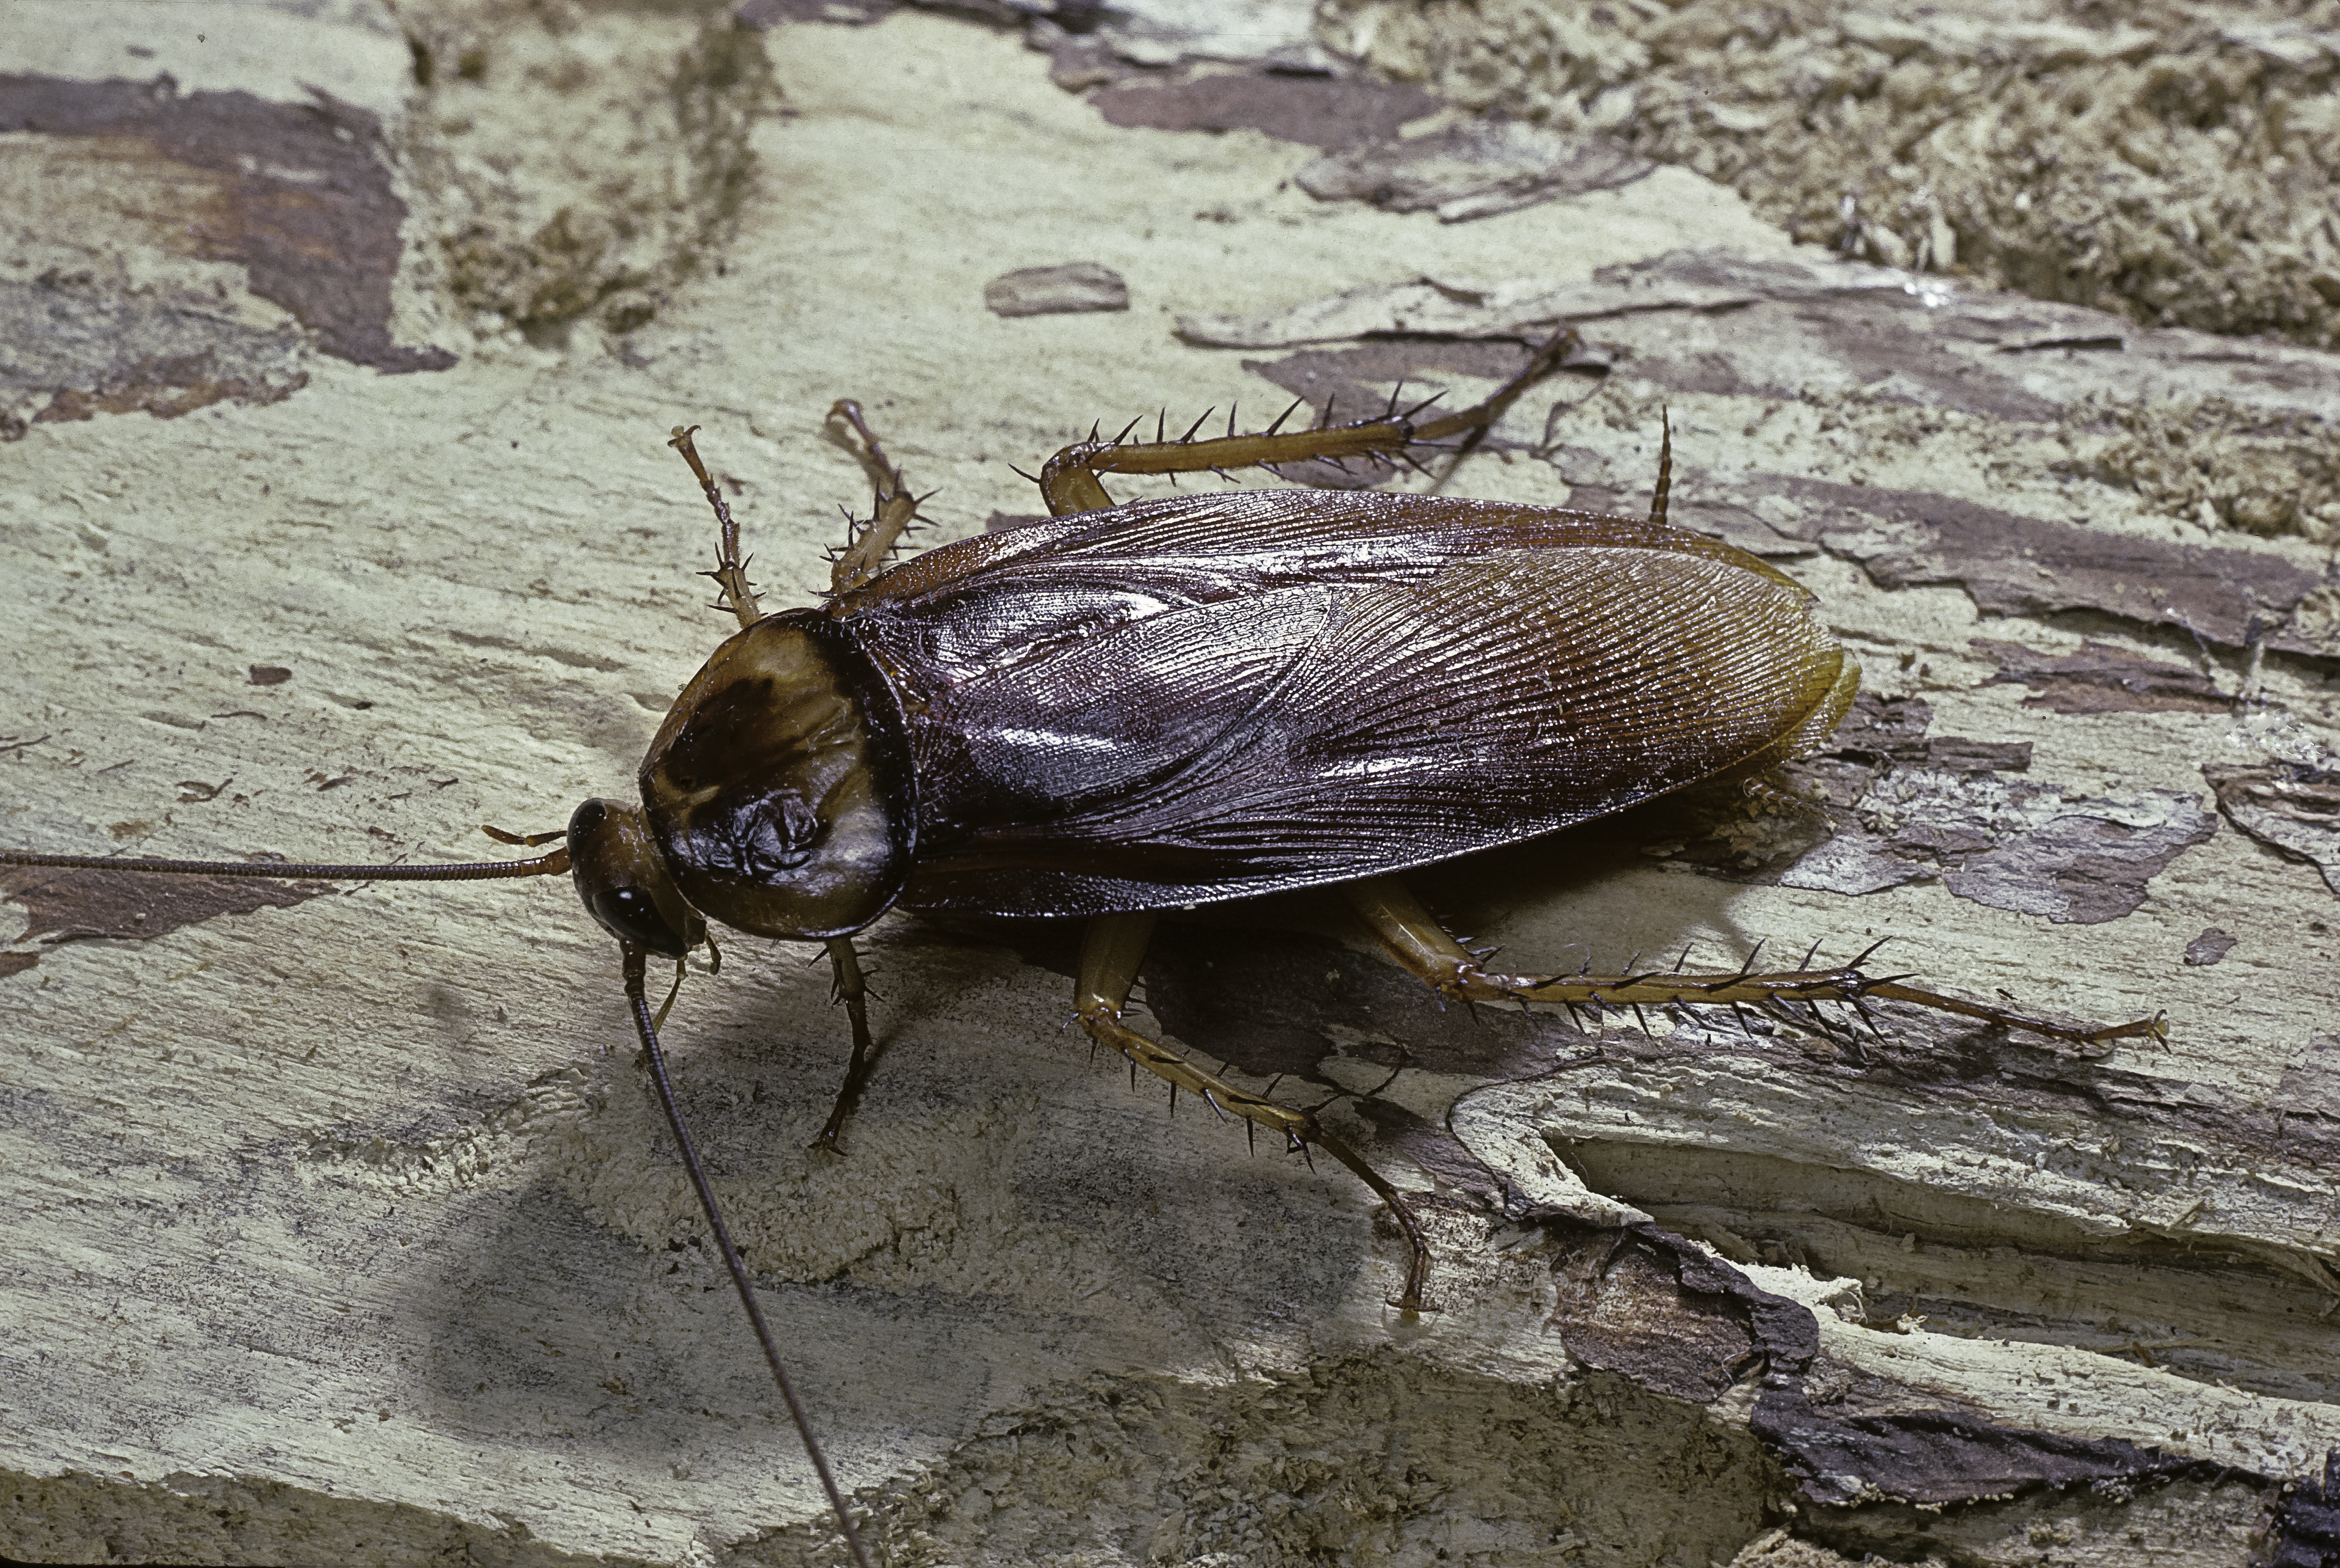 A cockroach | Source: Getty Images